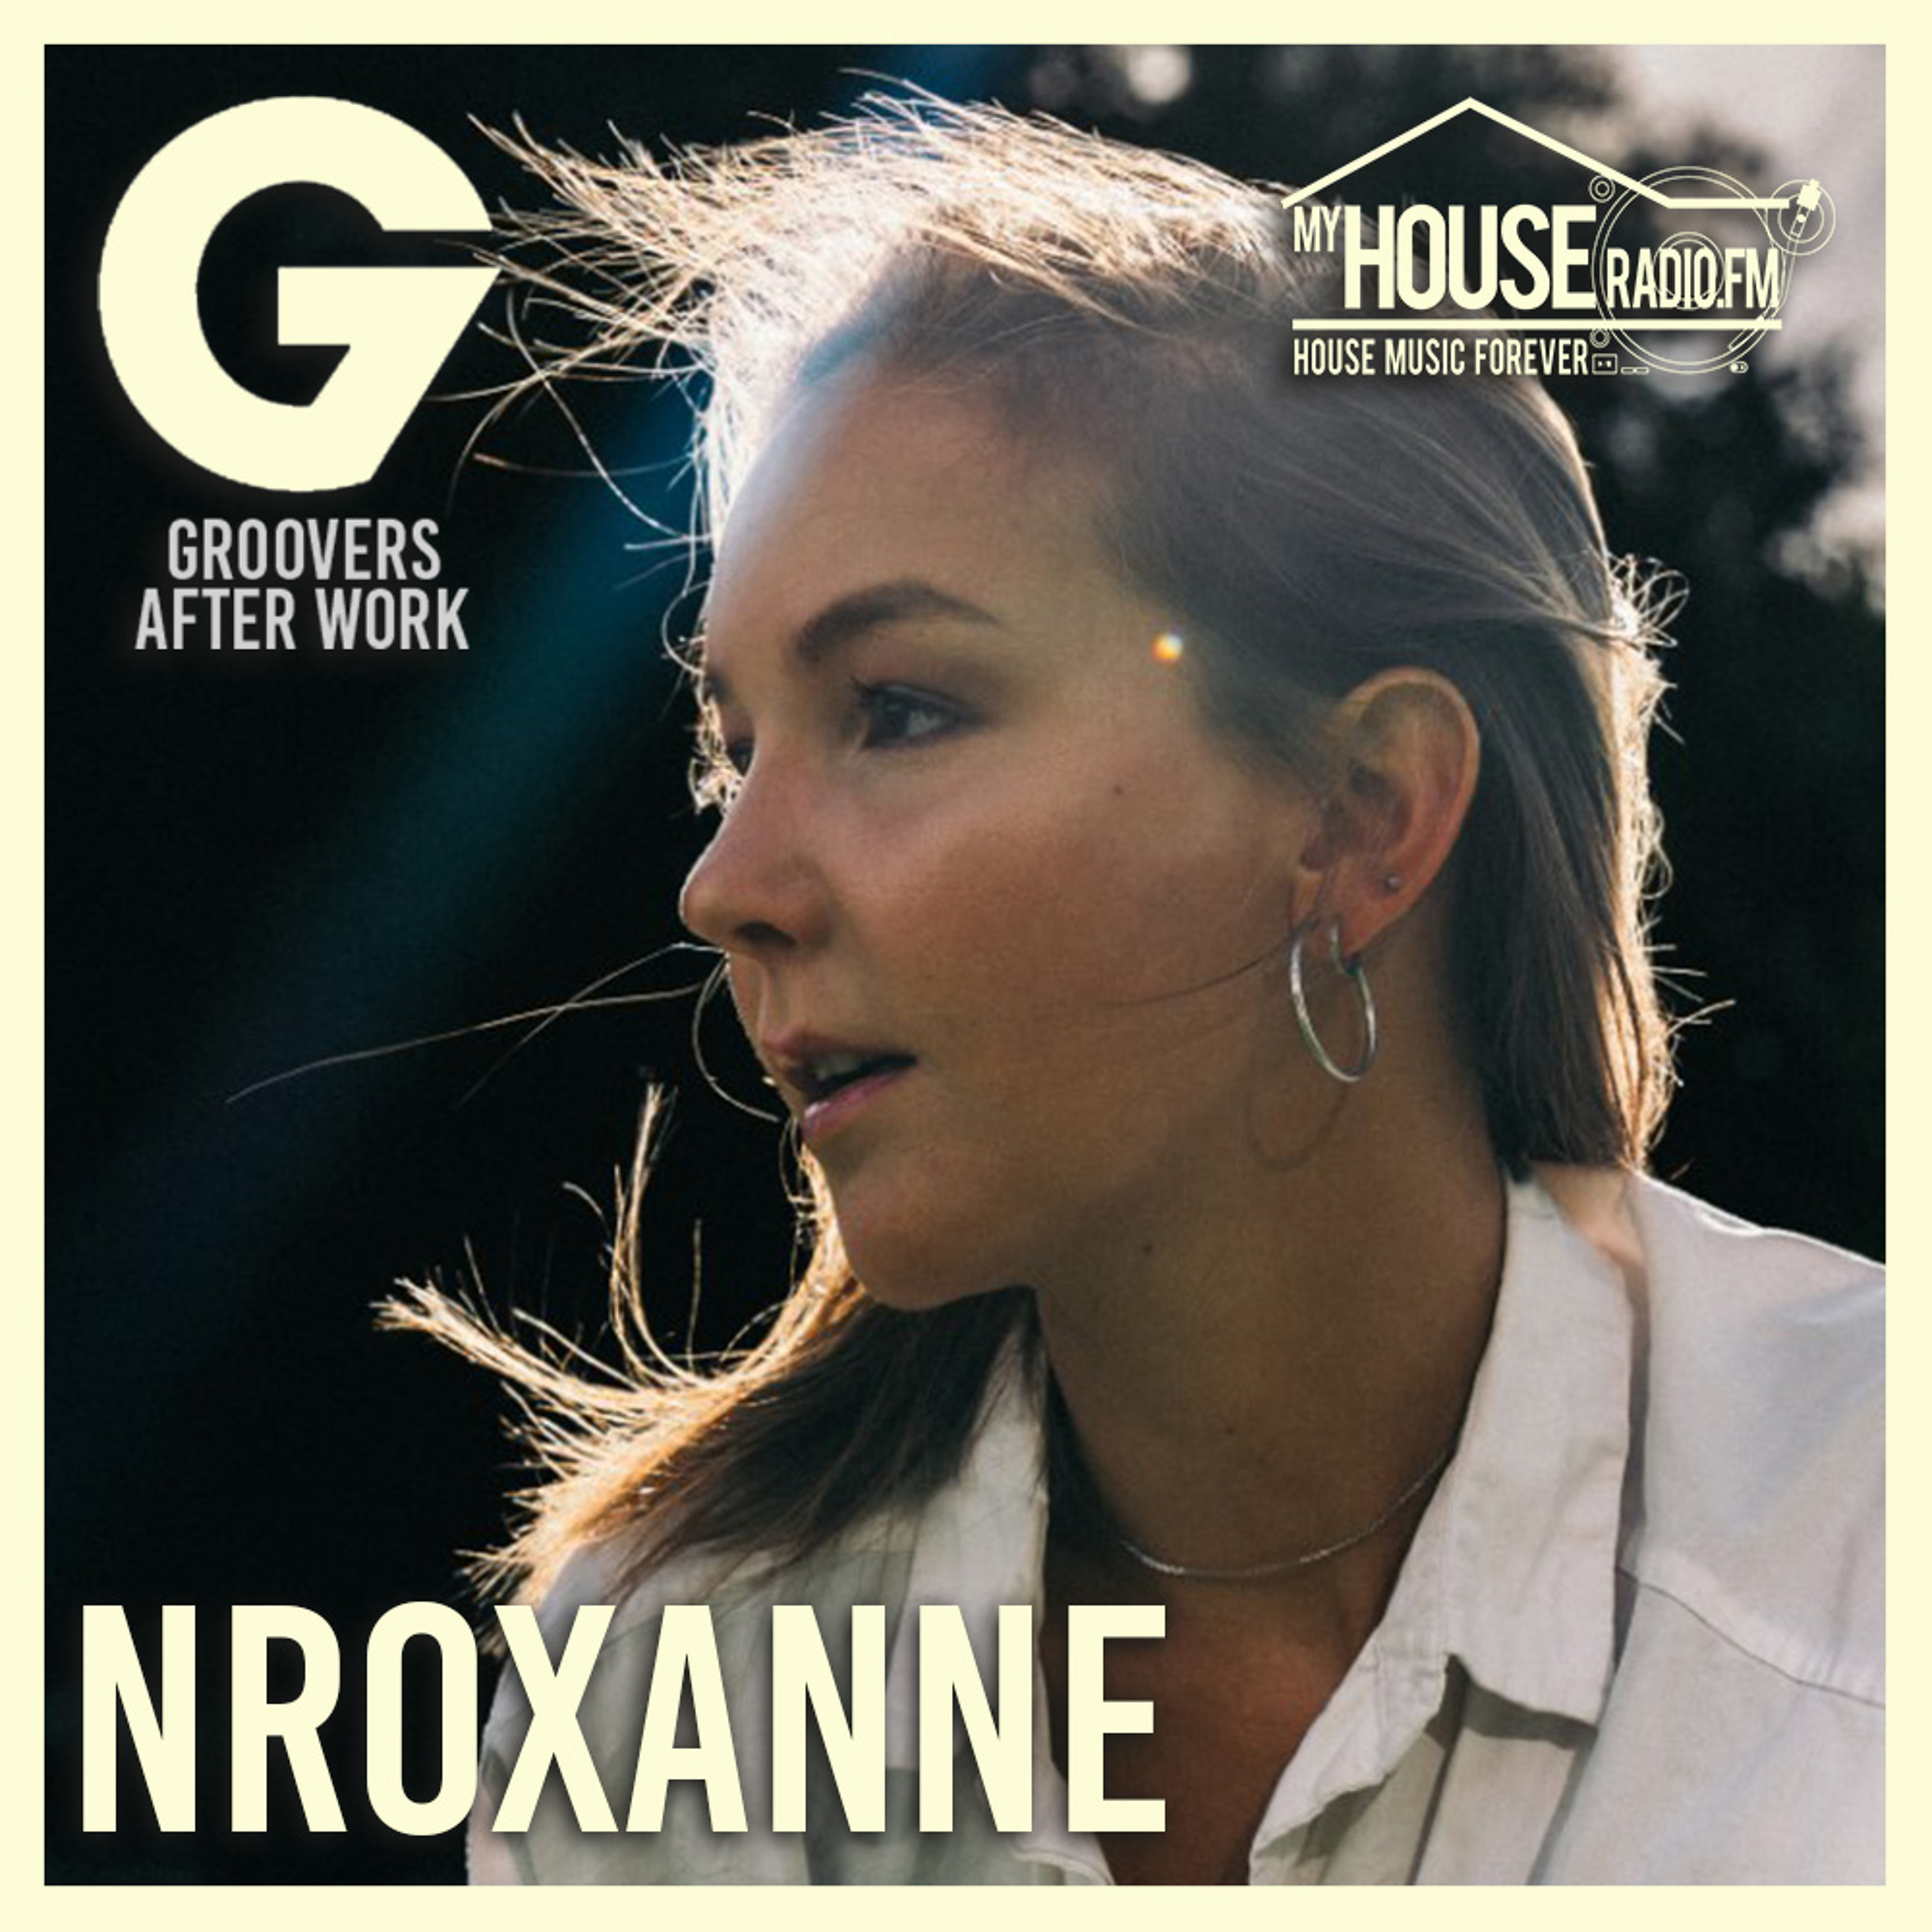 23#17-1 After Work On My House Radio By NRoxanne